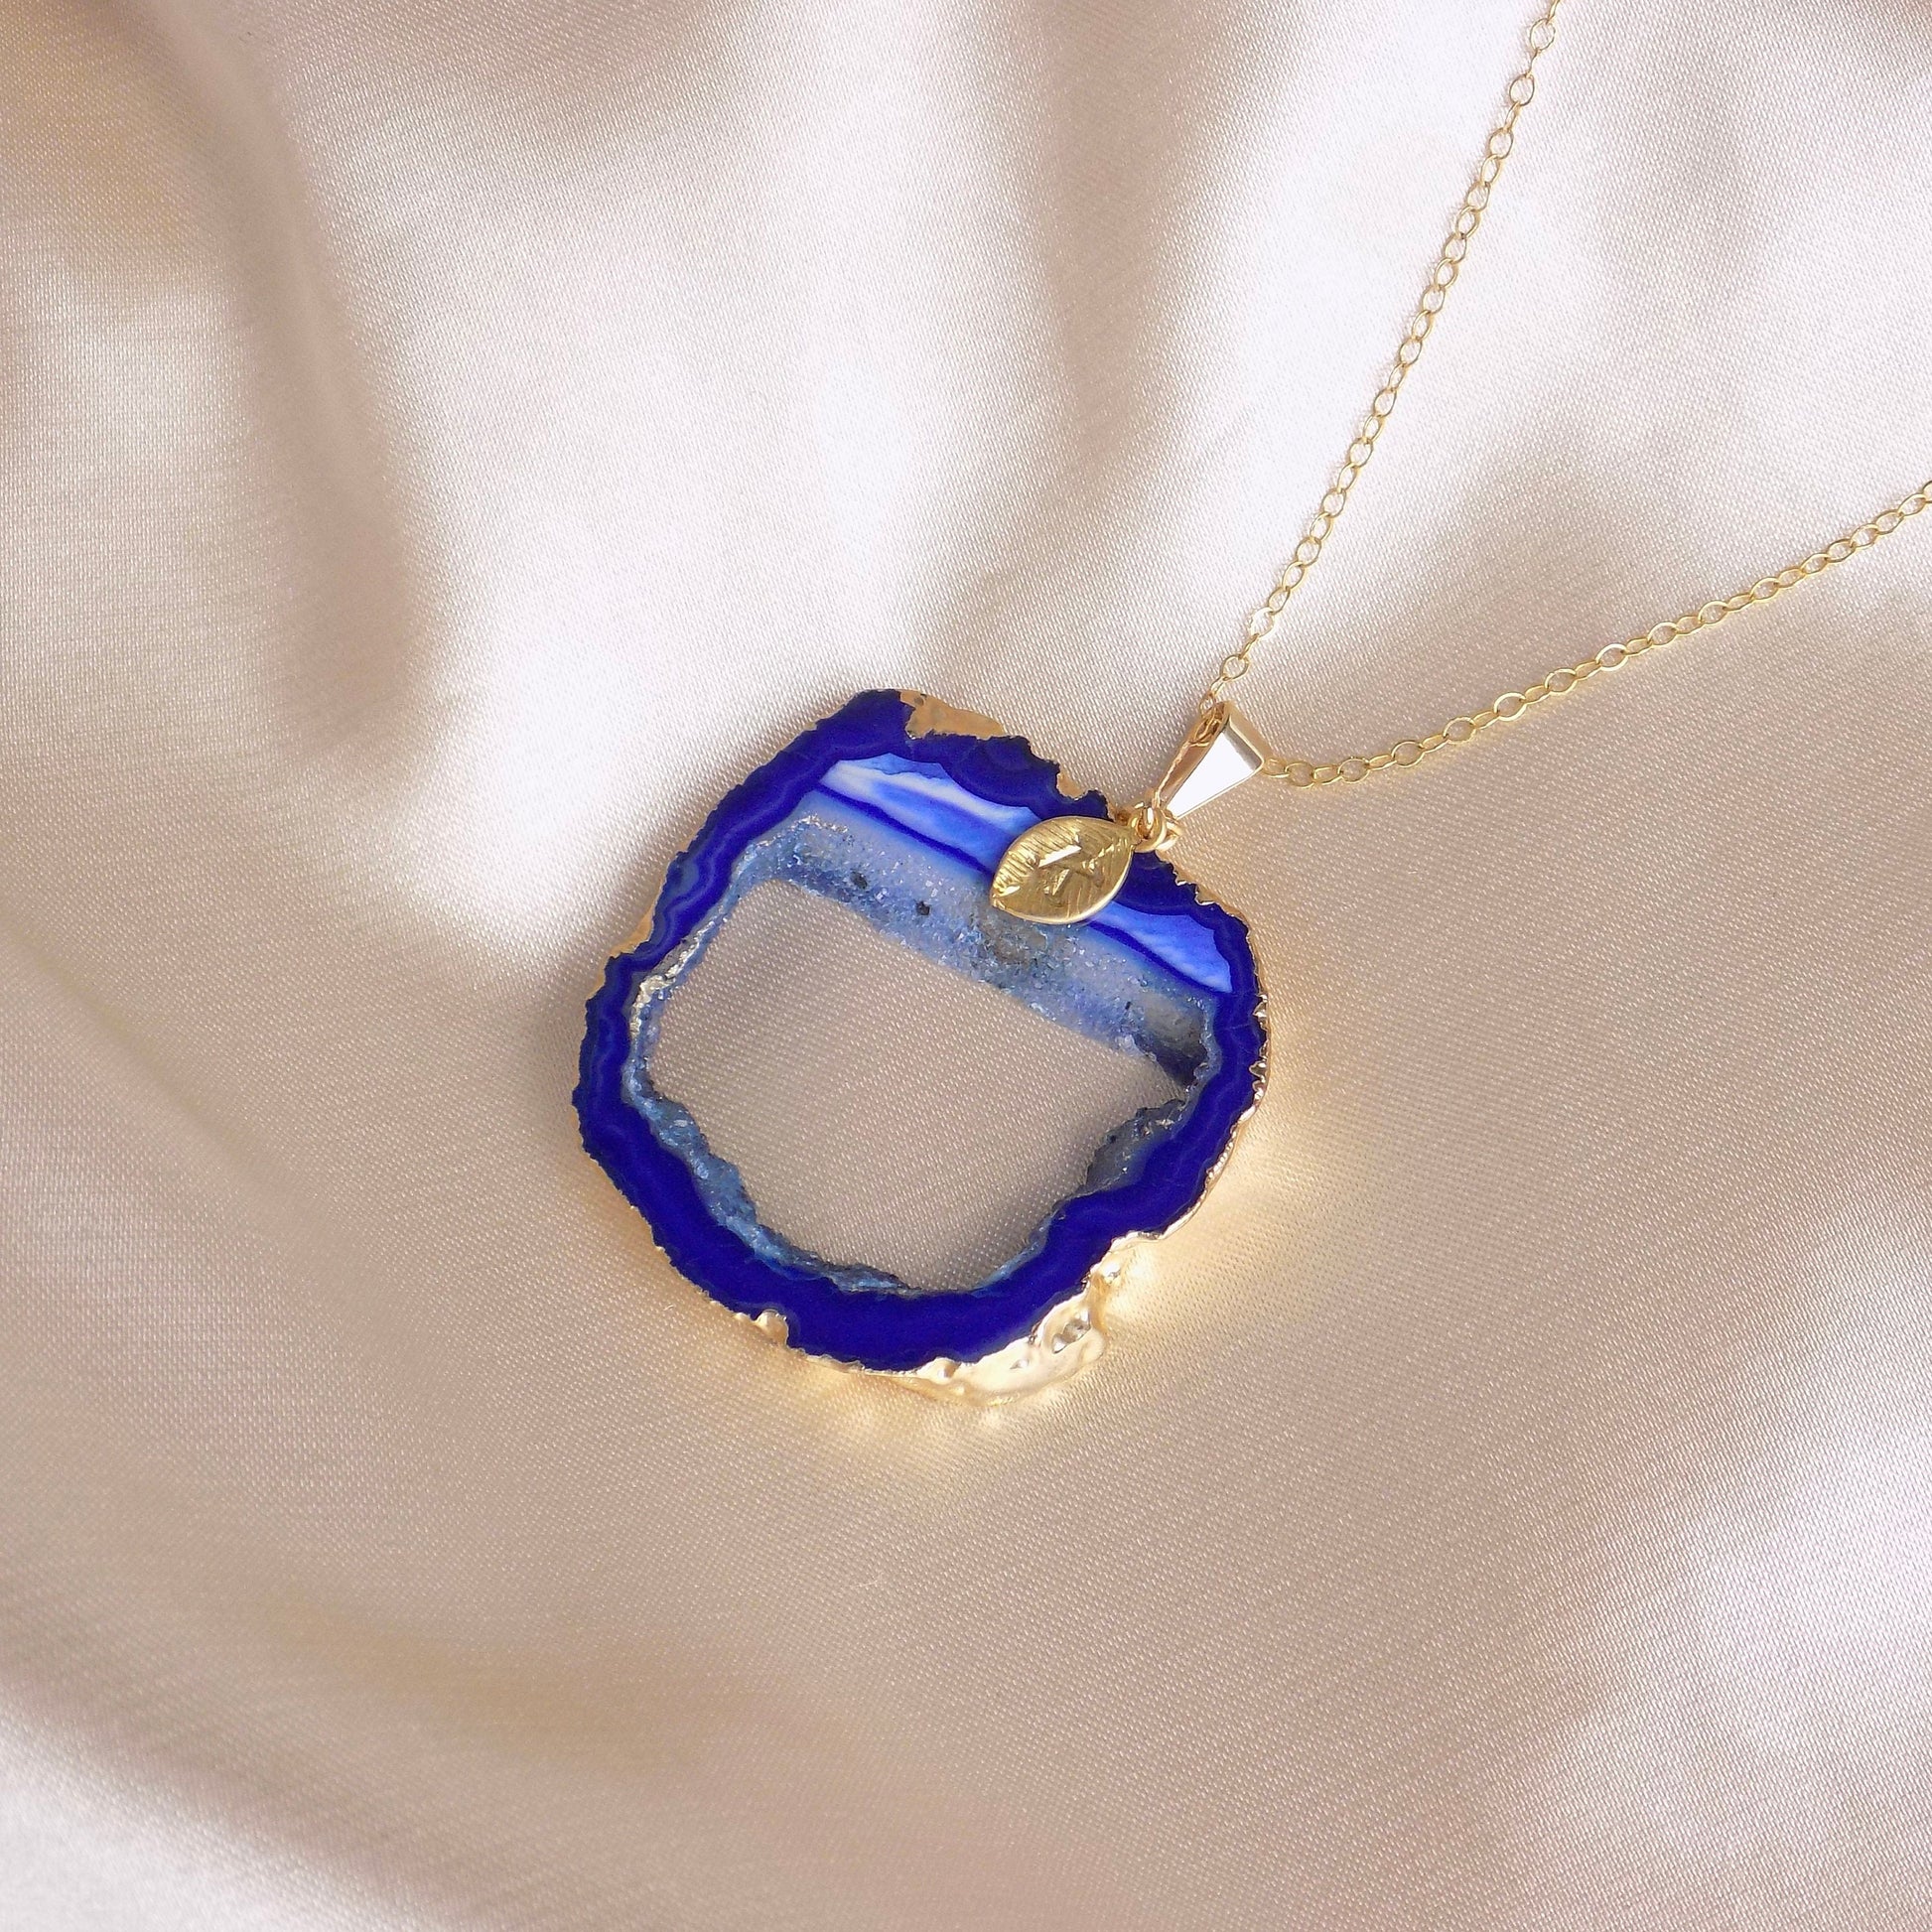 Unique Geode Necklace Gold, Navy Blue Crystal Pendant, Christmas Gift Women, G14-777